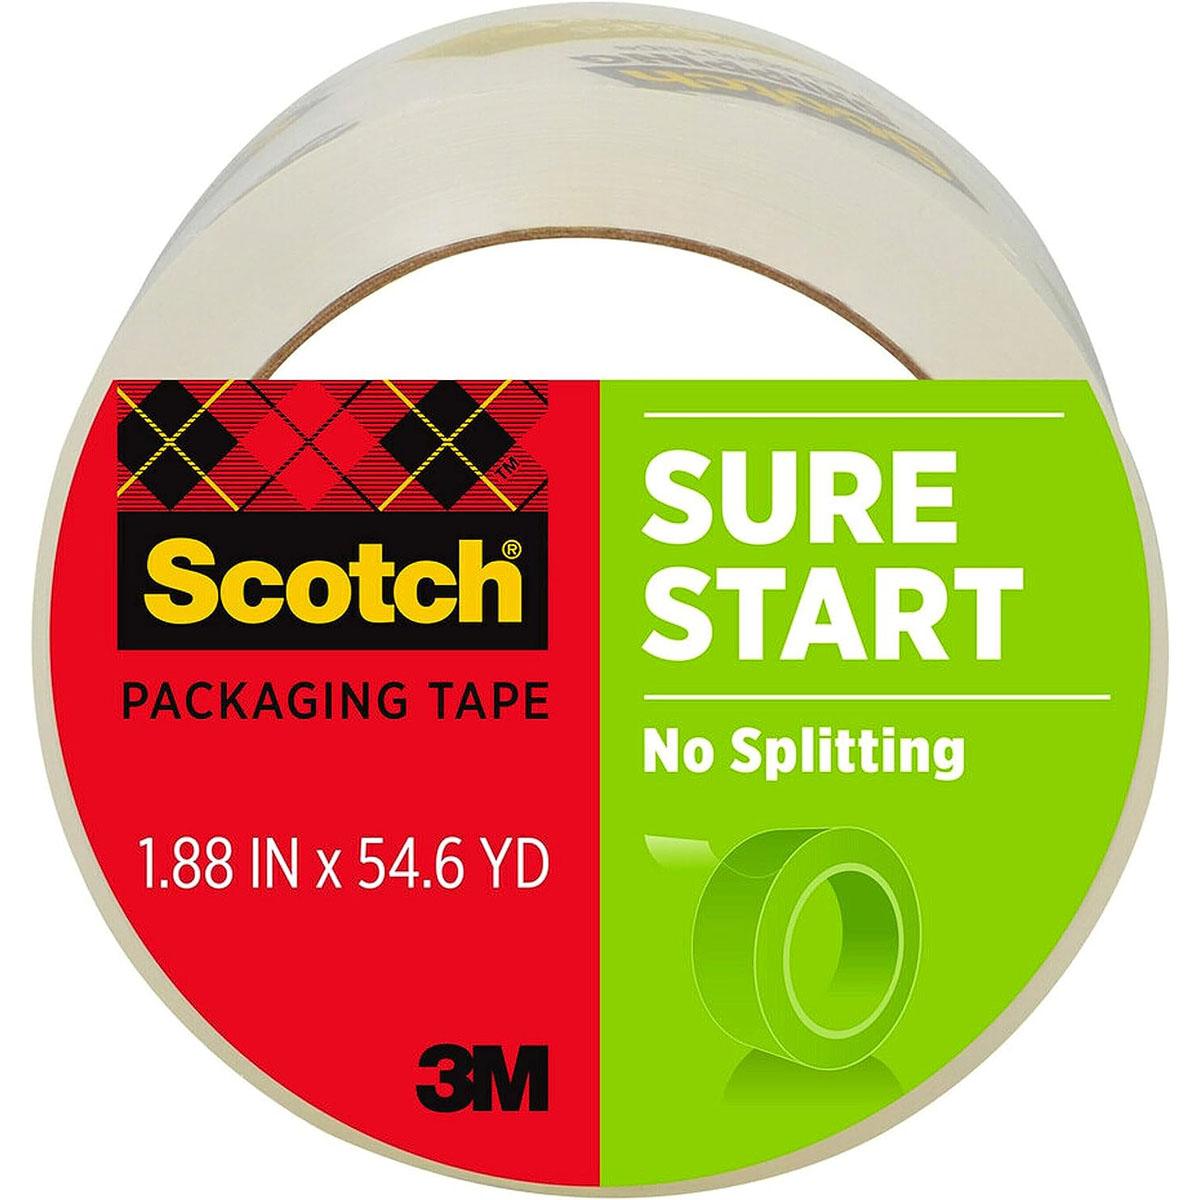 Scotch Sure Start Packing Tape for $2.92 Shipped